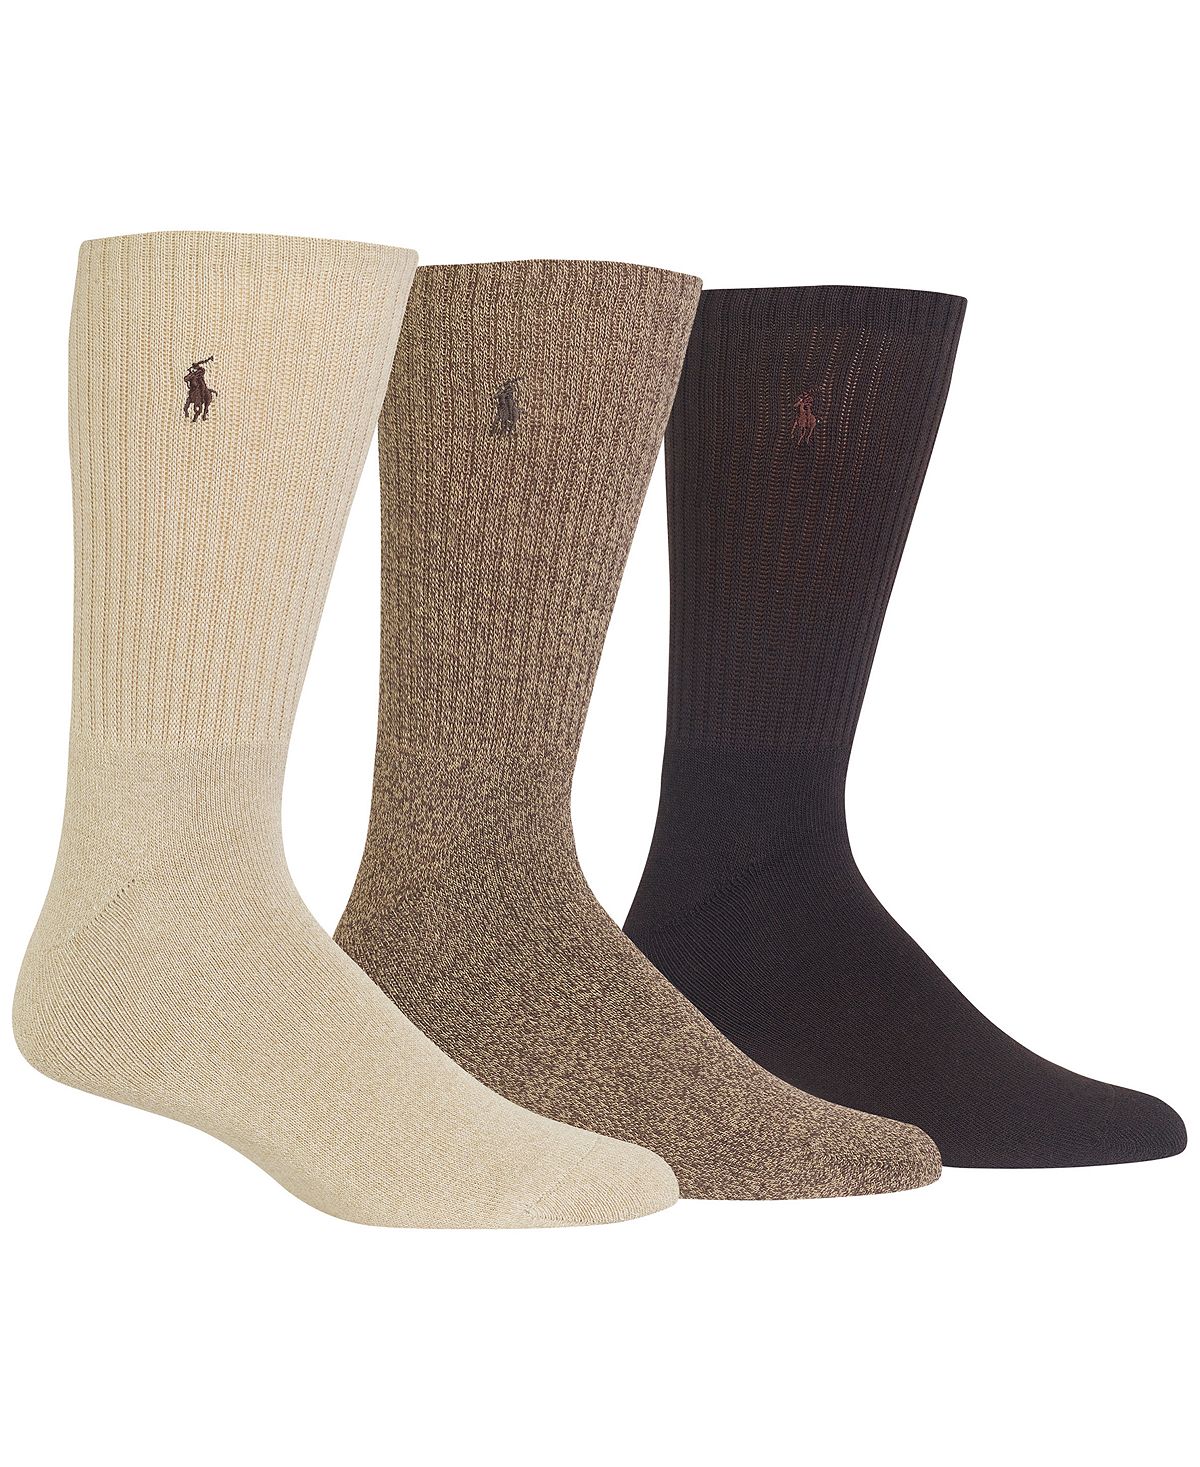 Polo Ralph Lauren 3-pk. Twisted Crew Casual Socks Brown Assorted